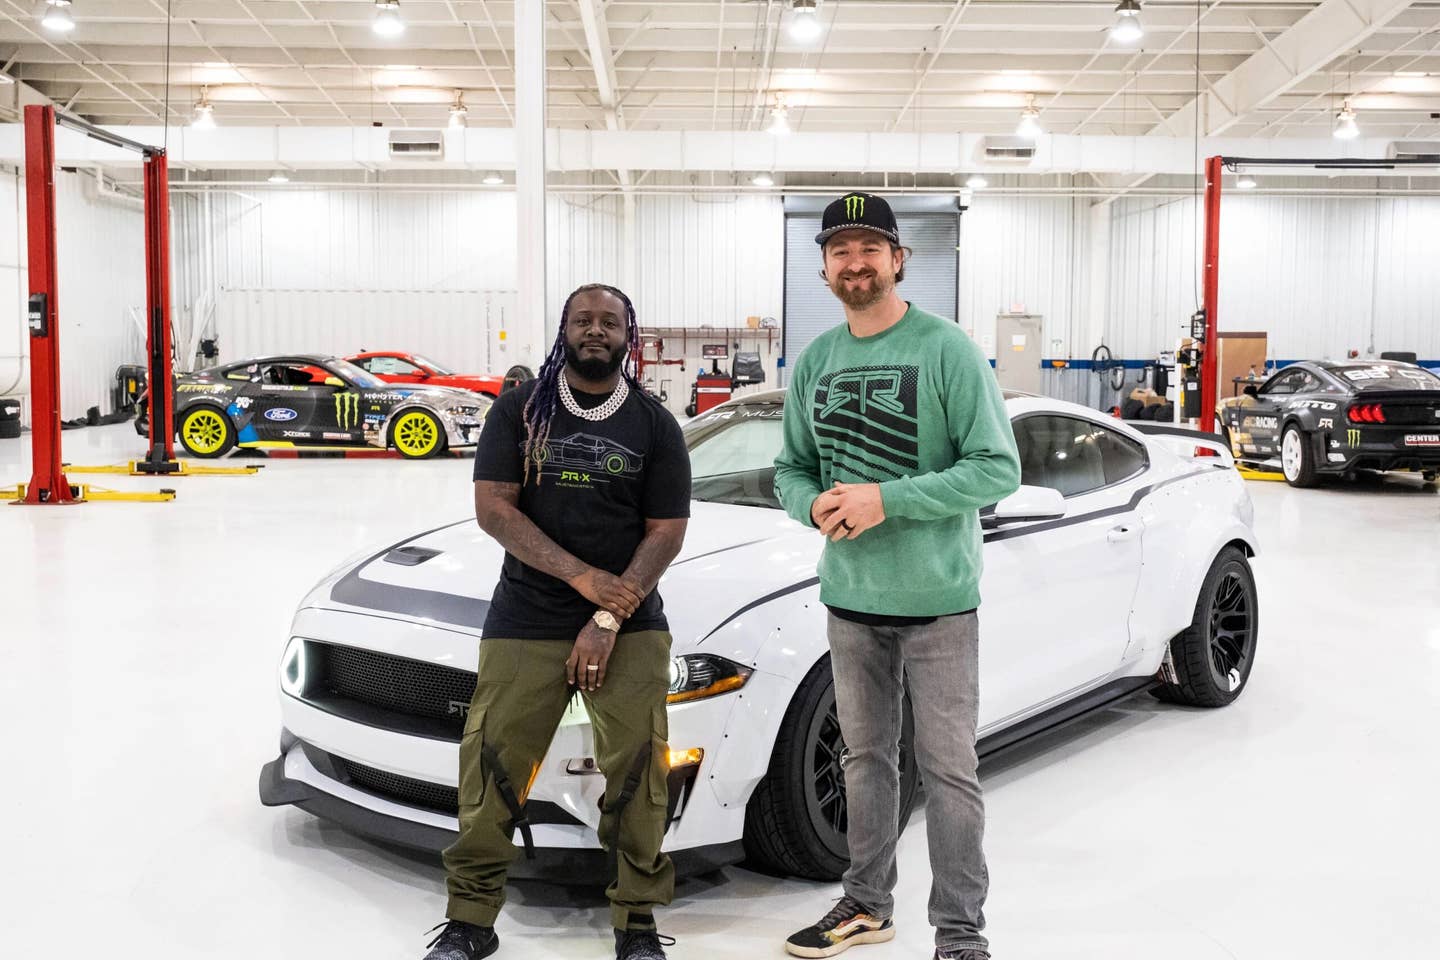 <em>T-Pain with Vaughn Gittin Jr. <a href="https://www.rtrvehicles.com/blogs/news/t-pain-rtr-spec-2-widebody" target="_blank" rel="noreferrer noopener">after picking up his new RTR Mustang</a>, which is set up for drifting with a "Fun-Haver" steering angle kit and a hydraulic handbrake.</em>